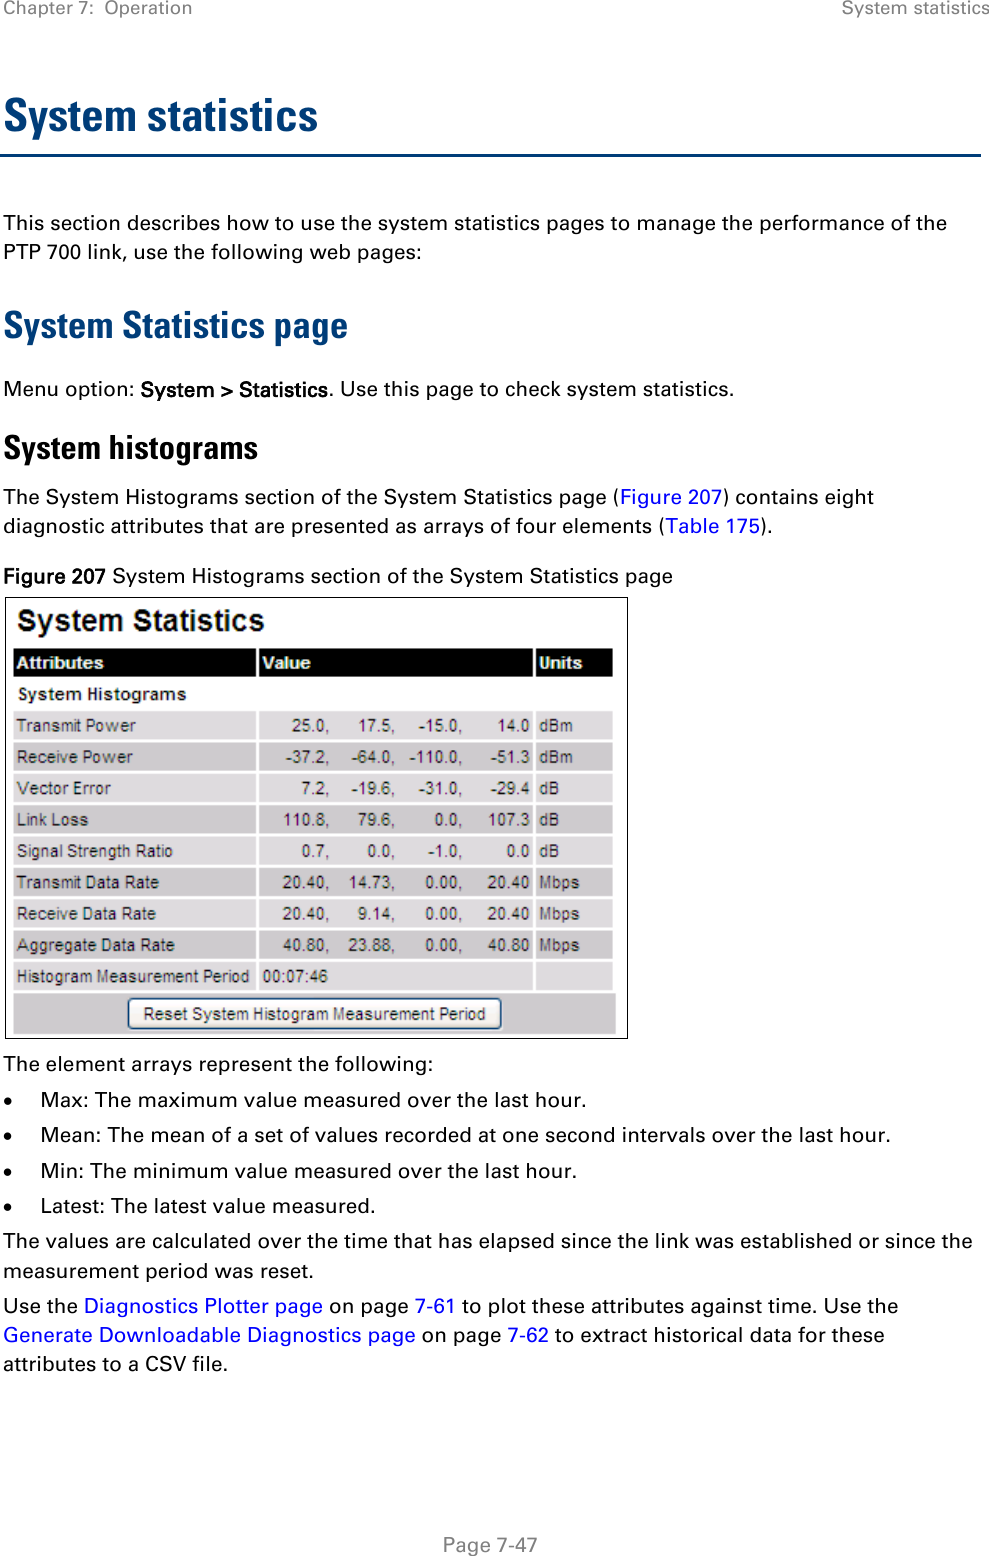 Chapter 7:  Operation System statistics  System statistics This section describes how to use the system statistics pages to manage the performance of the PTP 700 link, use the following web pages: System Statistics page Menu option: System &gt; Statistics. Use this page to check system statistics.  System histograms The System Histograms section of the System Statistics page (Figure 207) contains eight diagnostic attributes that are presented as arrays of four elements (Table 175). Figure 207 System Histograms section of the System Statistics page  The element arrays represent the following: • Max: The maximum value measured over the last hour. • Mean: The mean of a set of values recorded at one second intervals over the last hour. • Min: The minimum value measured over the last hour. • Latest: The latest value measured.  The values are calculated over the time that has elapsed since the link was established or since the measurement period was reset. Use the Diagnostics Plotter page on page 7-61 to plot these attributes against time. Use the Generate Downloadable Diagnostics page on page 7-62 to extract historical data for these attributes to a CSV file.  Page 7-47 